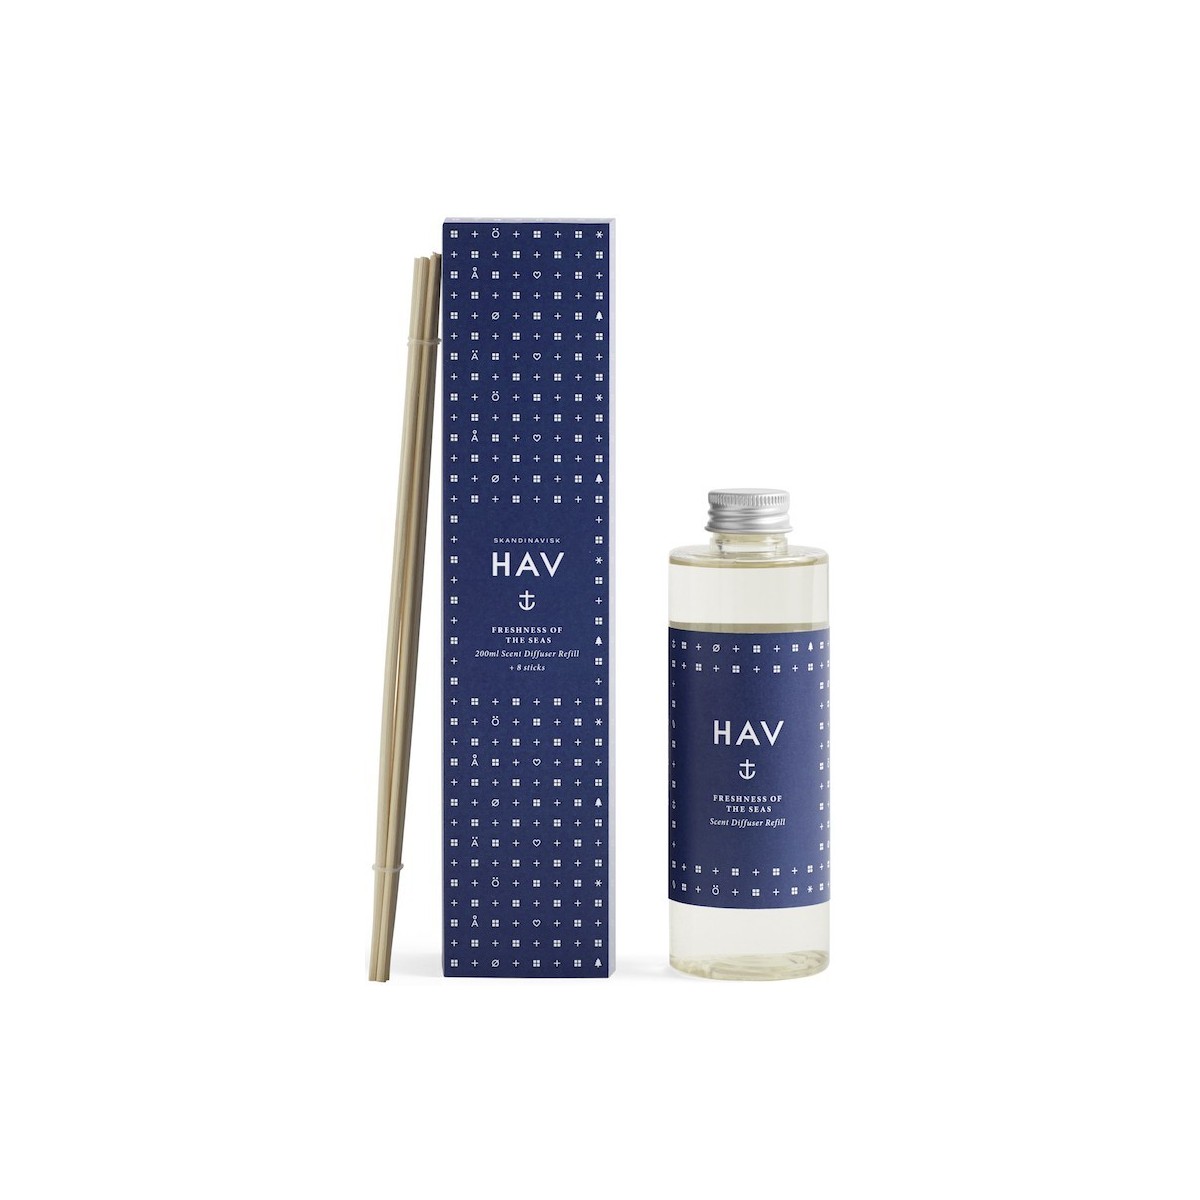 SOLD OUT scent diffuser refill - Hav